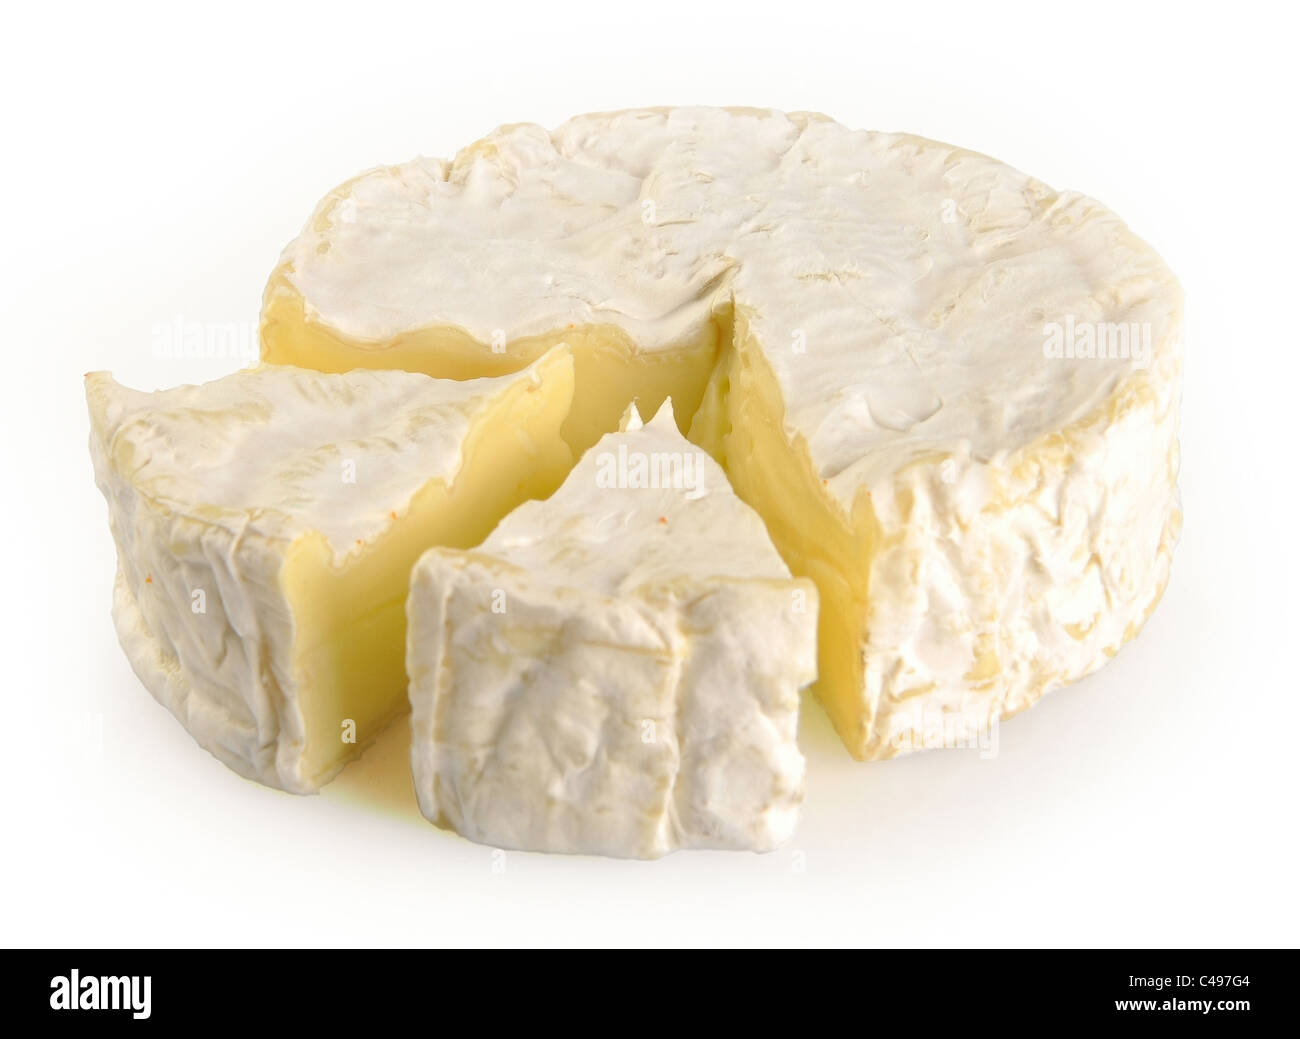 camembert cheese on a white background Stock Photo